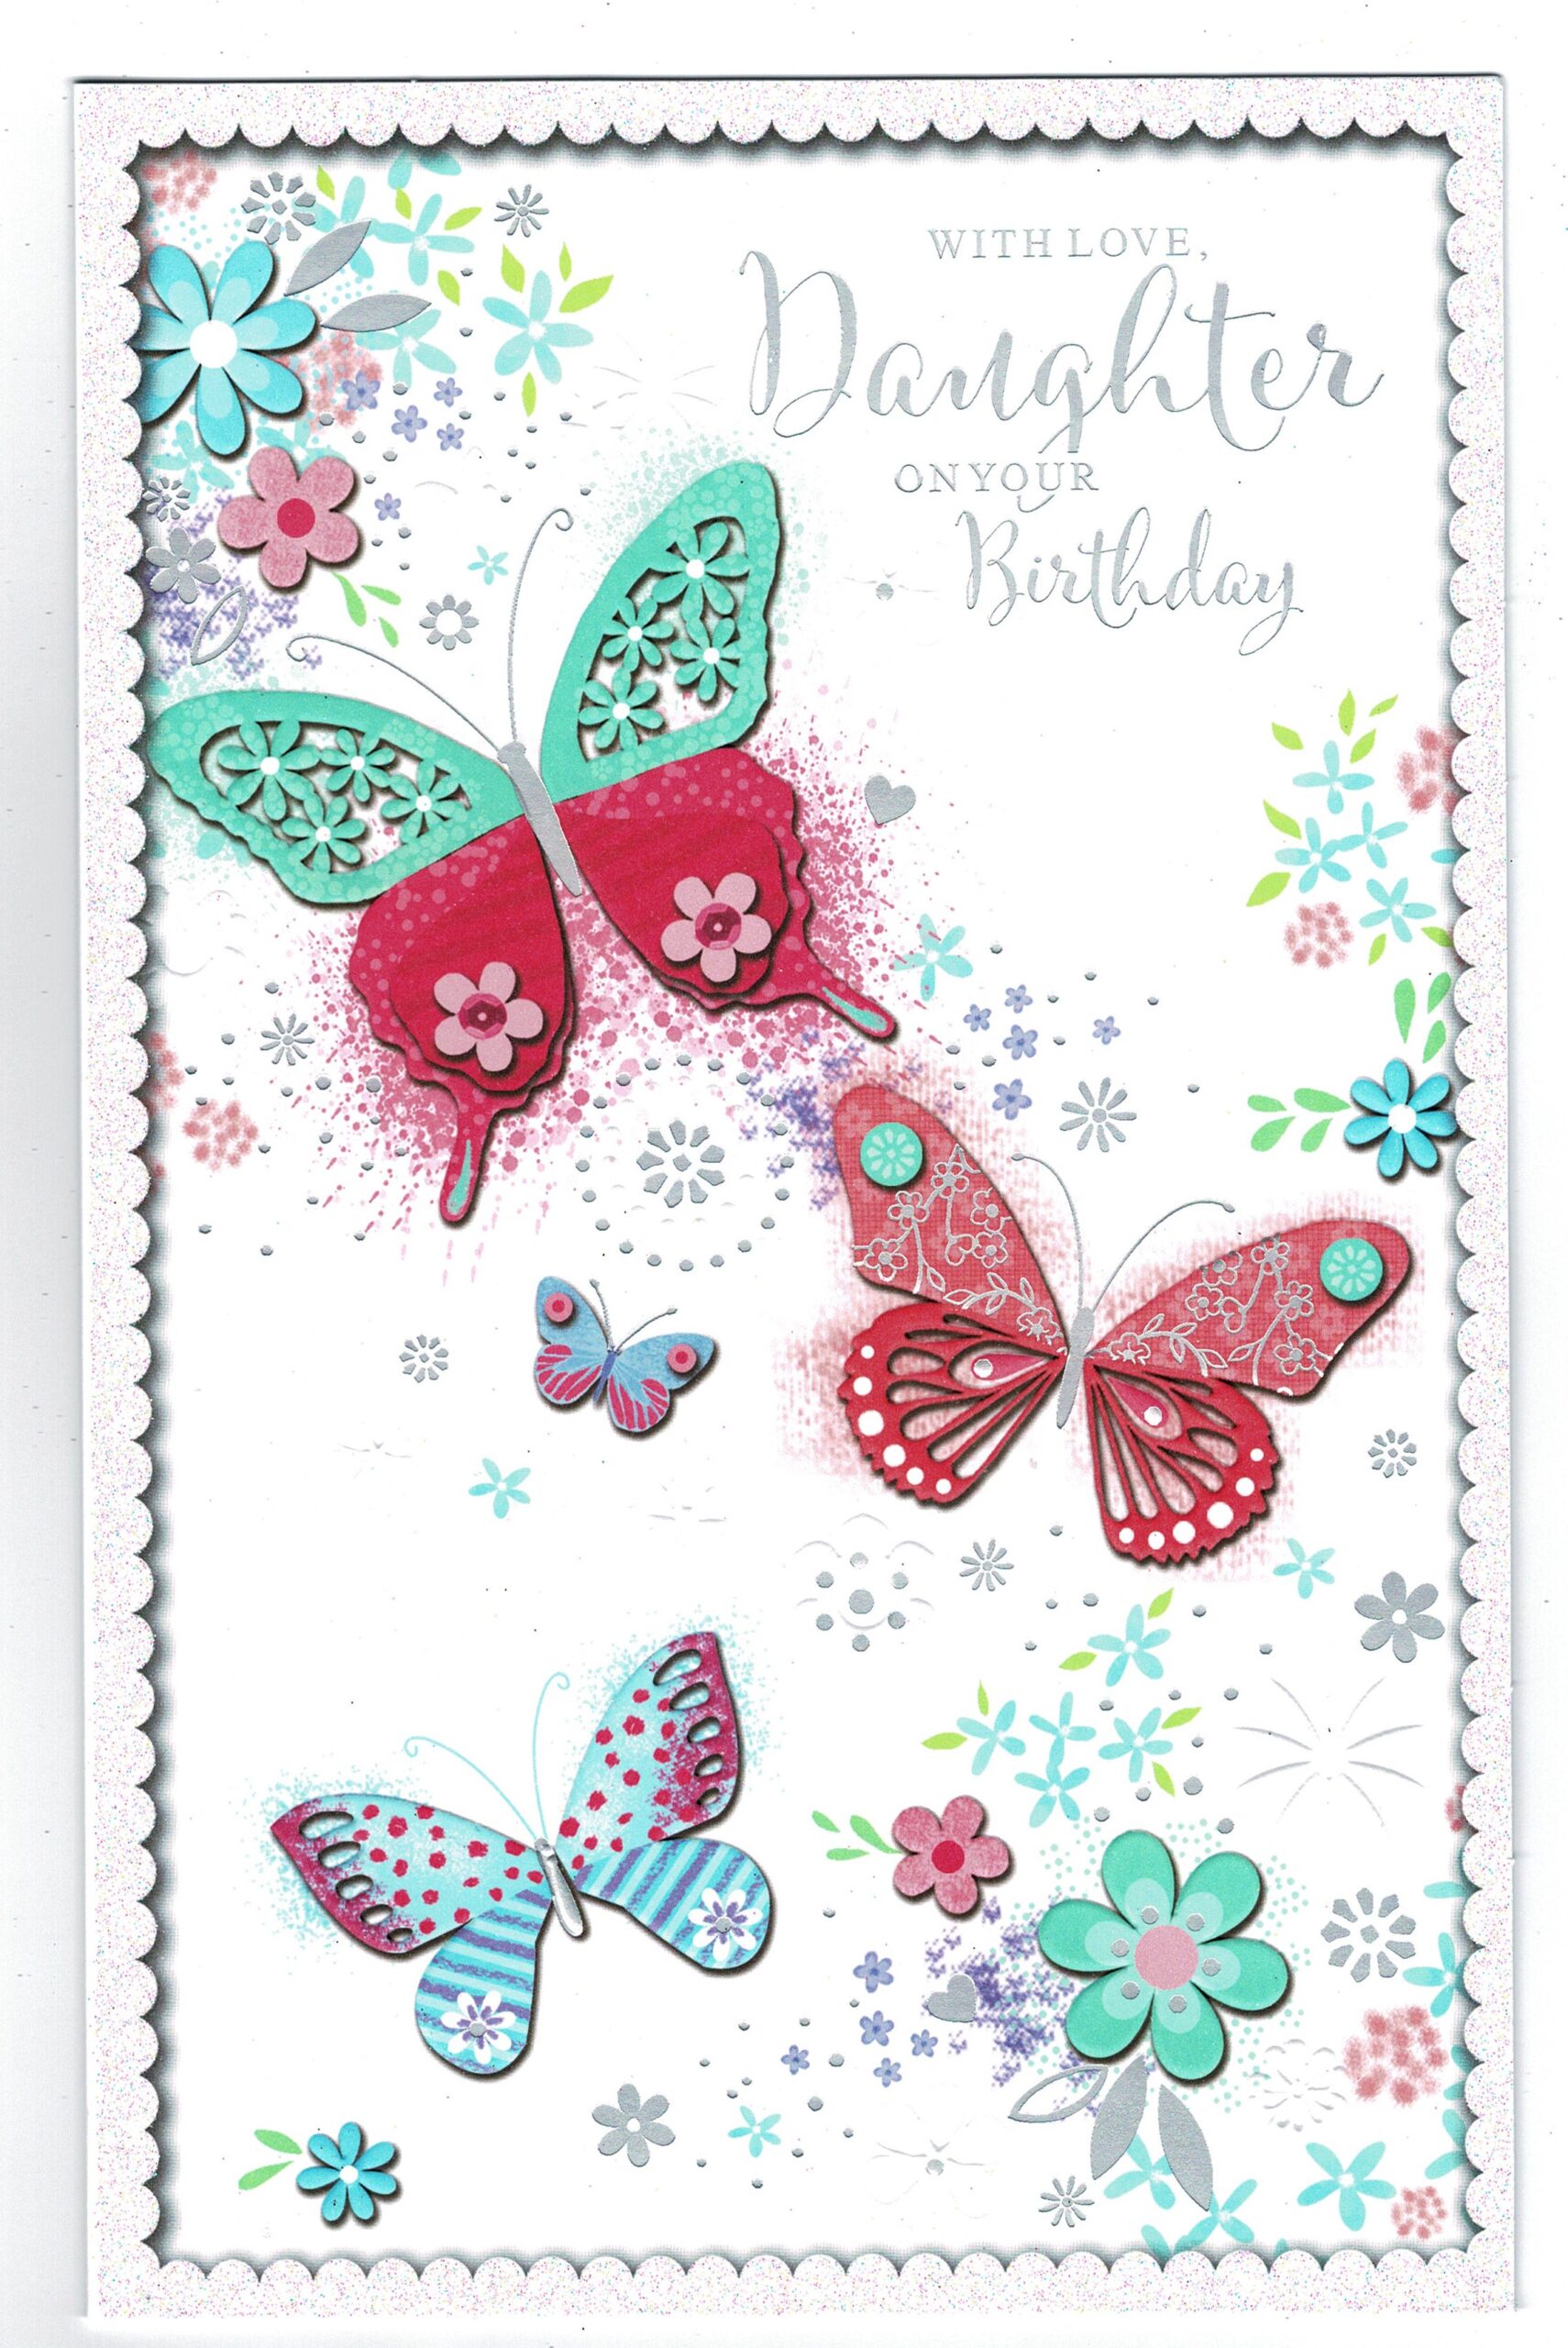 Daughter Birthday Card ' With Daughter On Your Birthday' 17 cm x 27 cm -  With Love Gifts & Cards